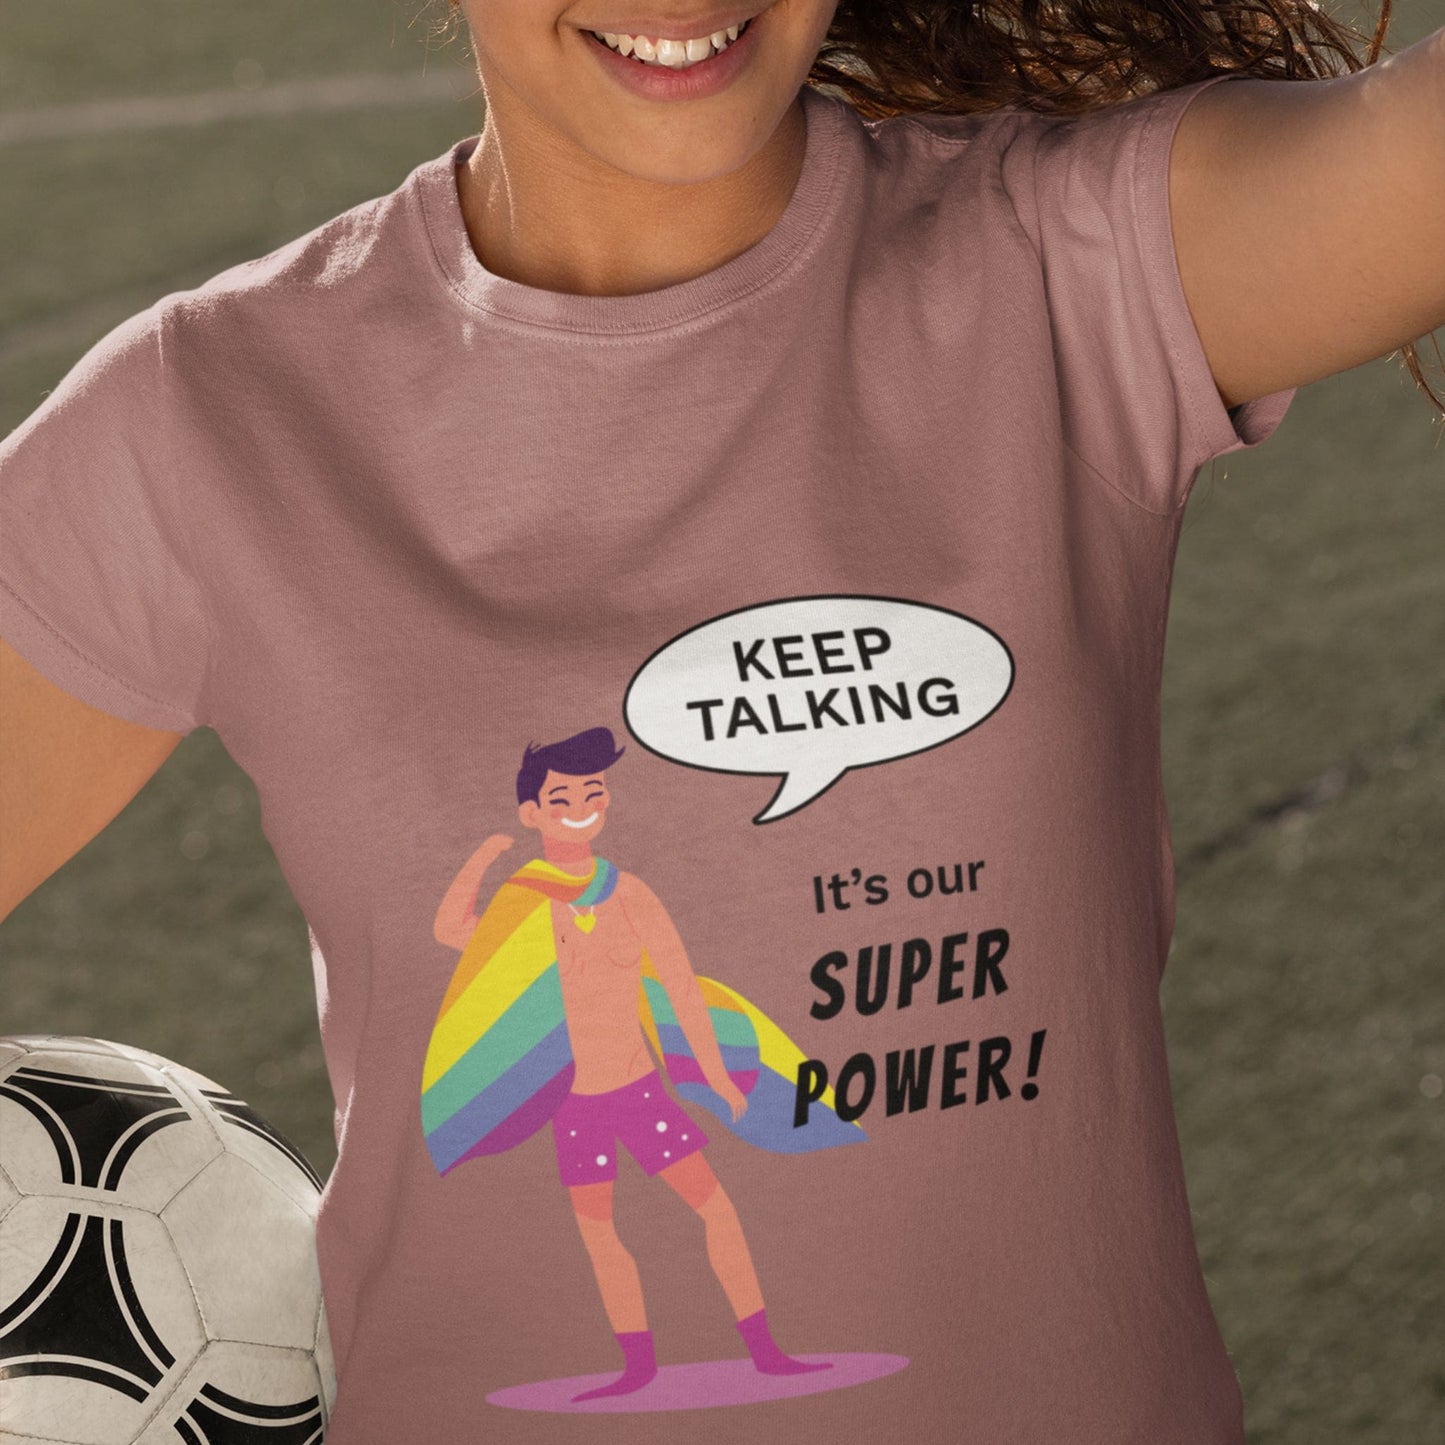 Keep Talking It's our Super Power! Unisex T-shirt - Queer We Are Shop